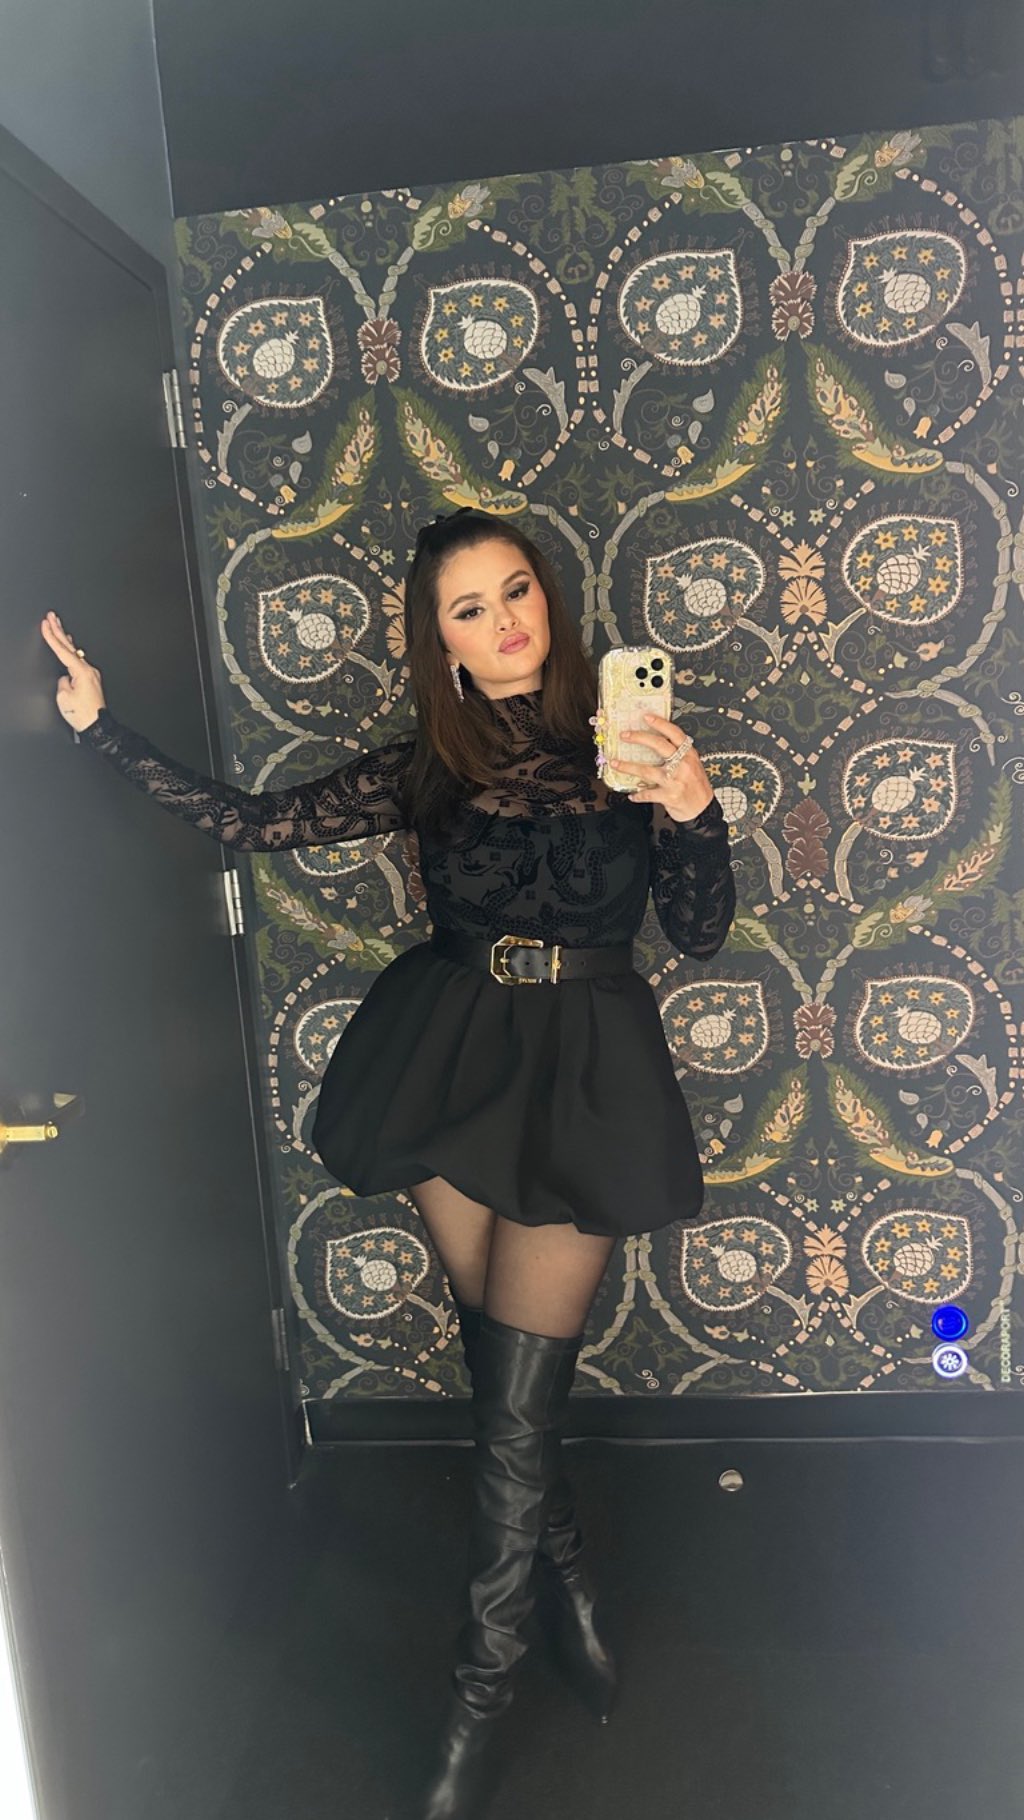 Selena snapped selfies of herself in the outfit before her appearance on Jimmy Kimmel Live!